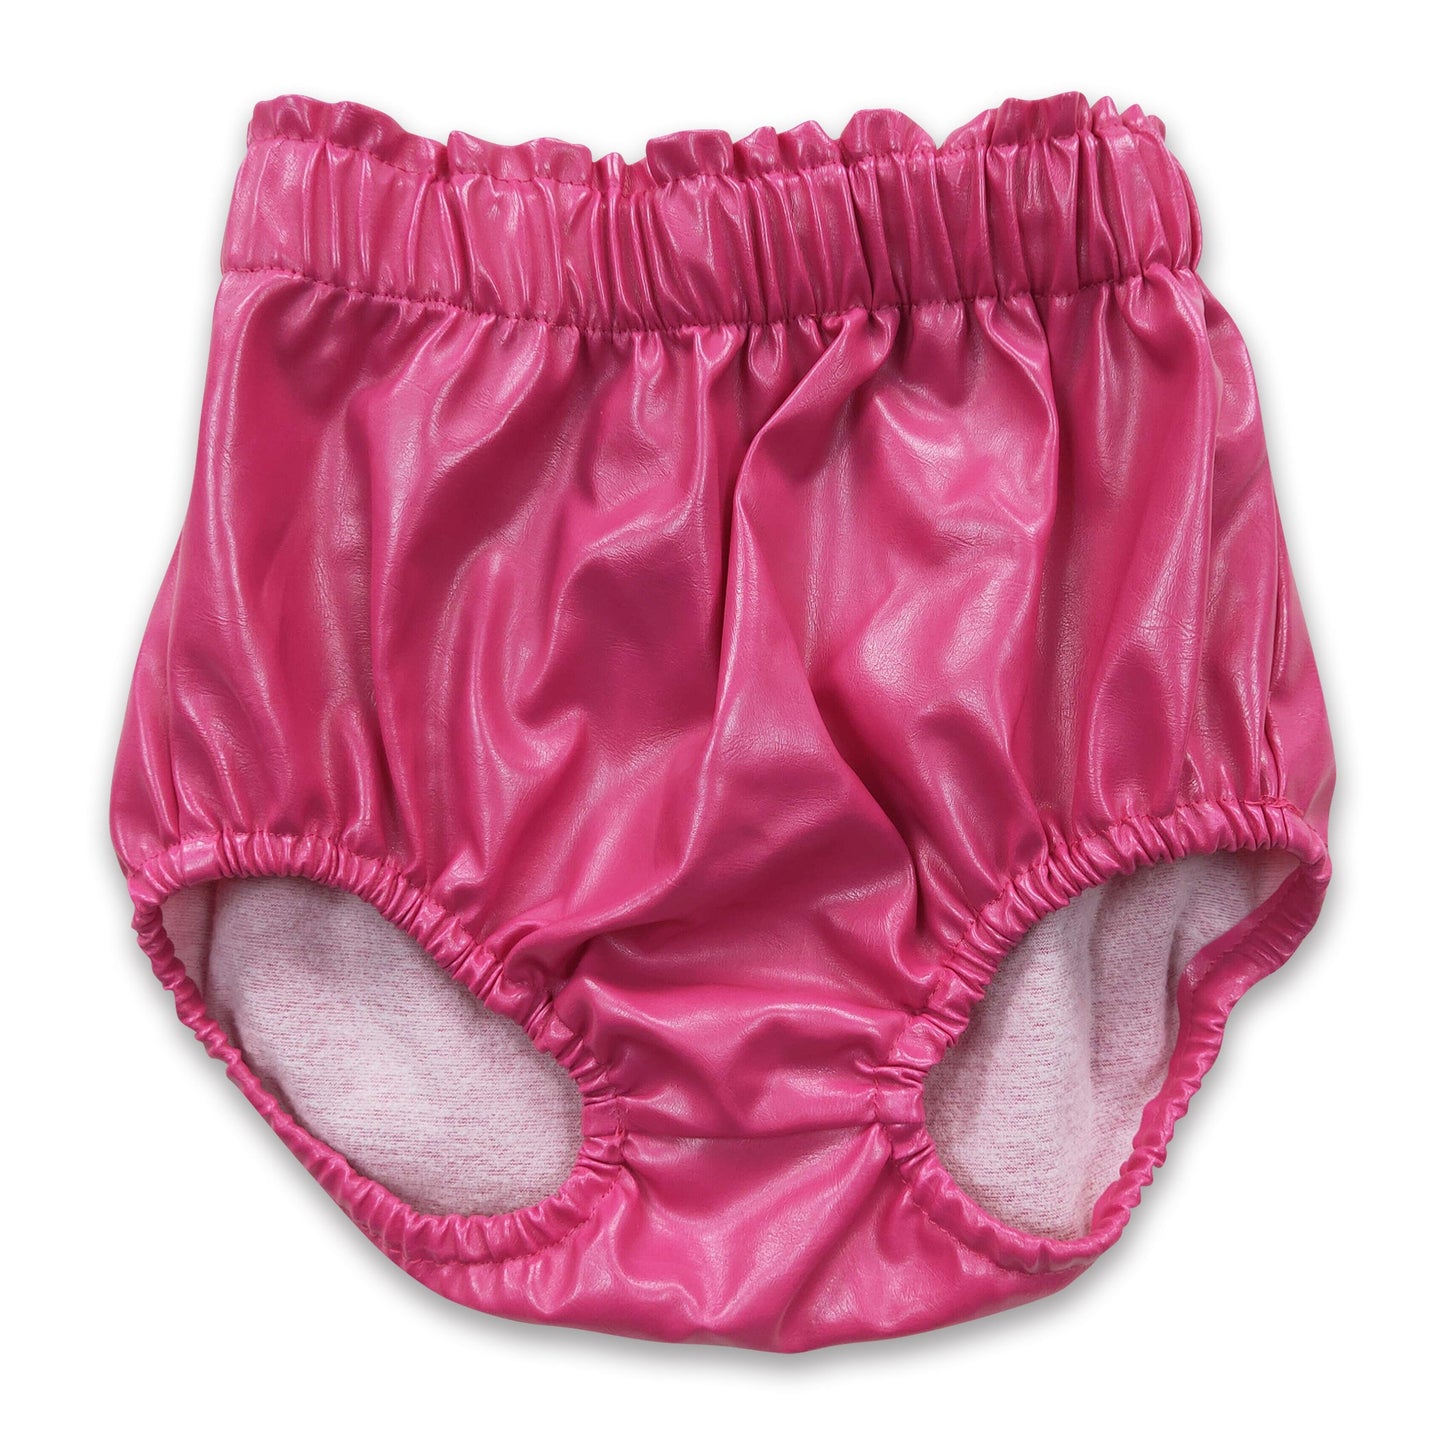 Hot pink leather baby girls bummies